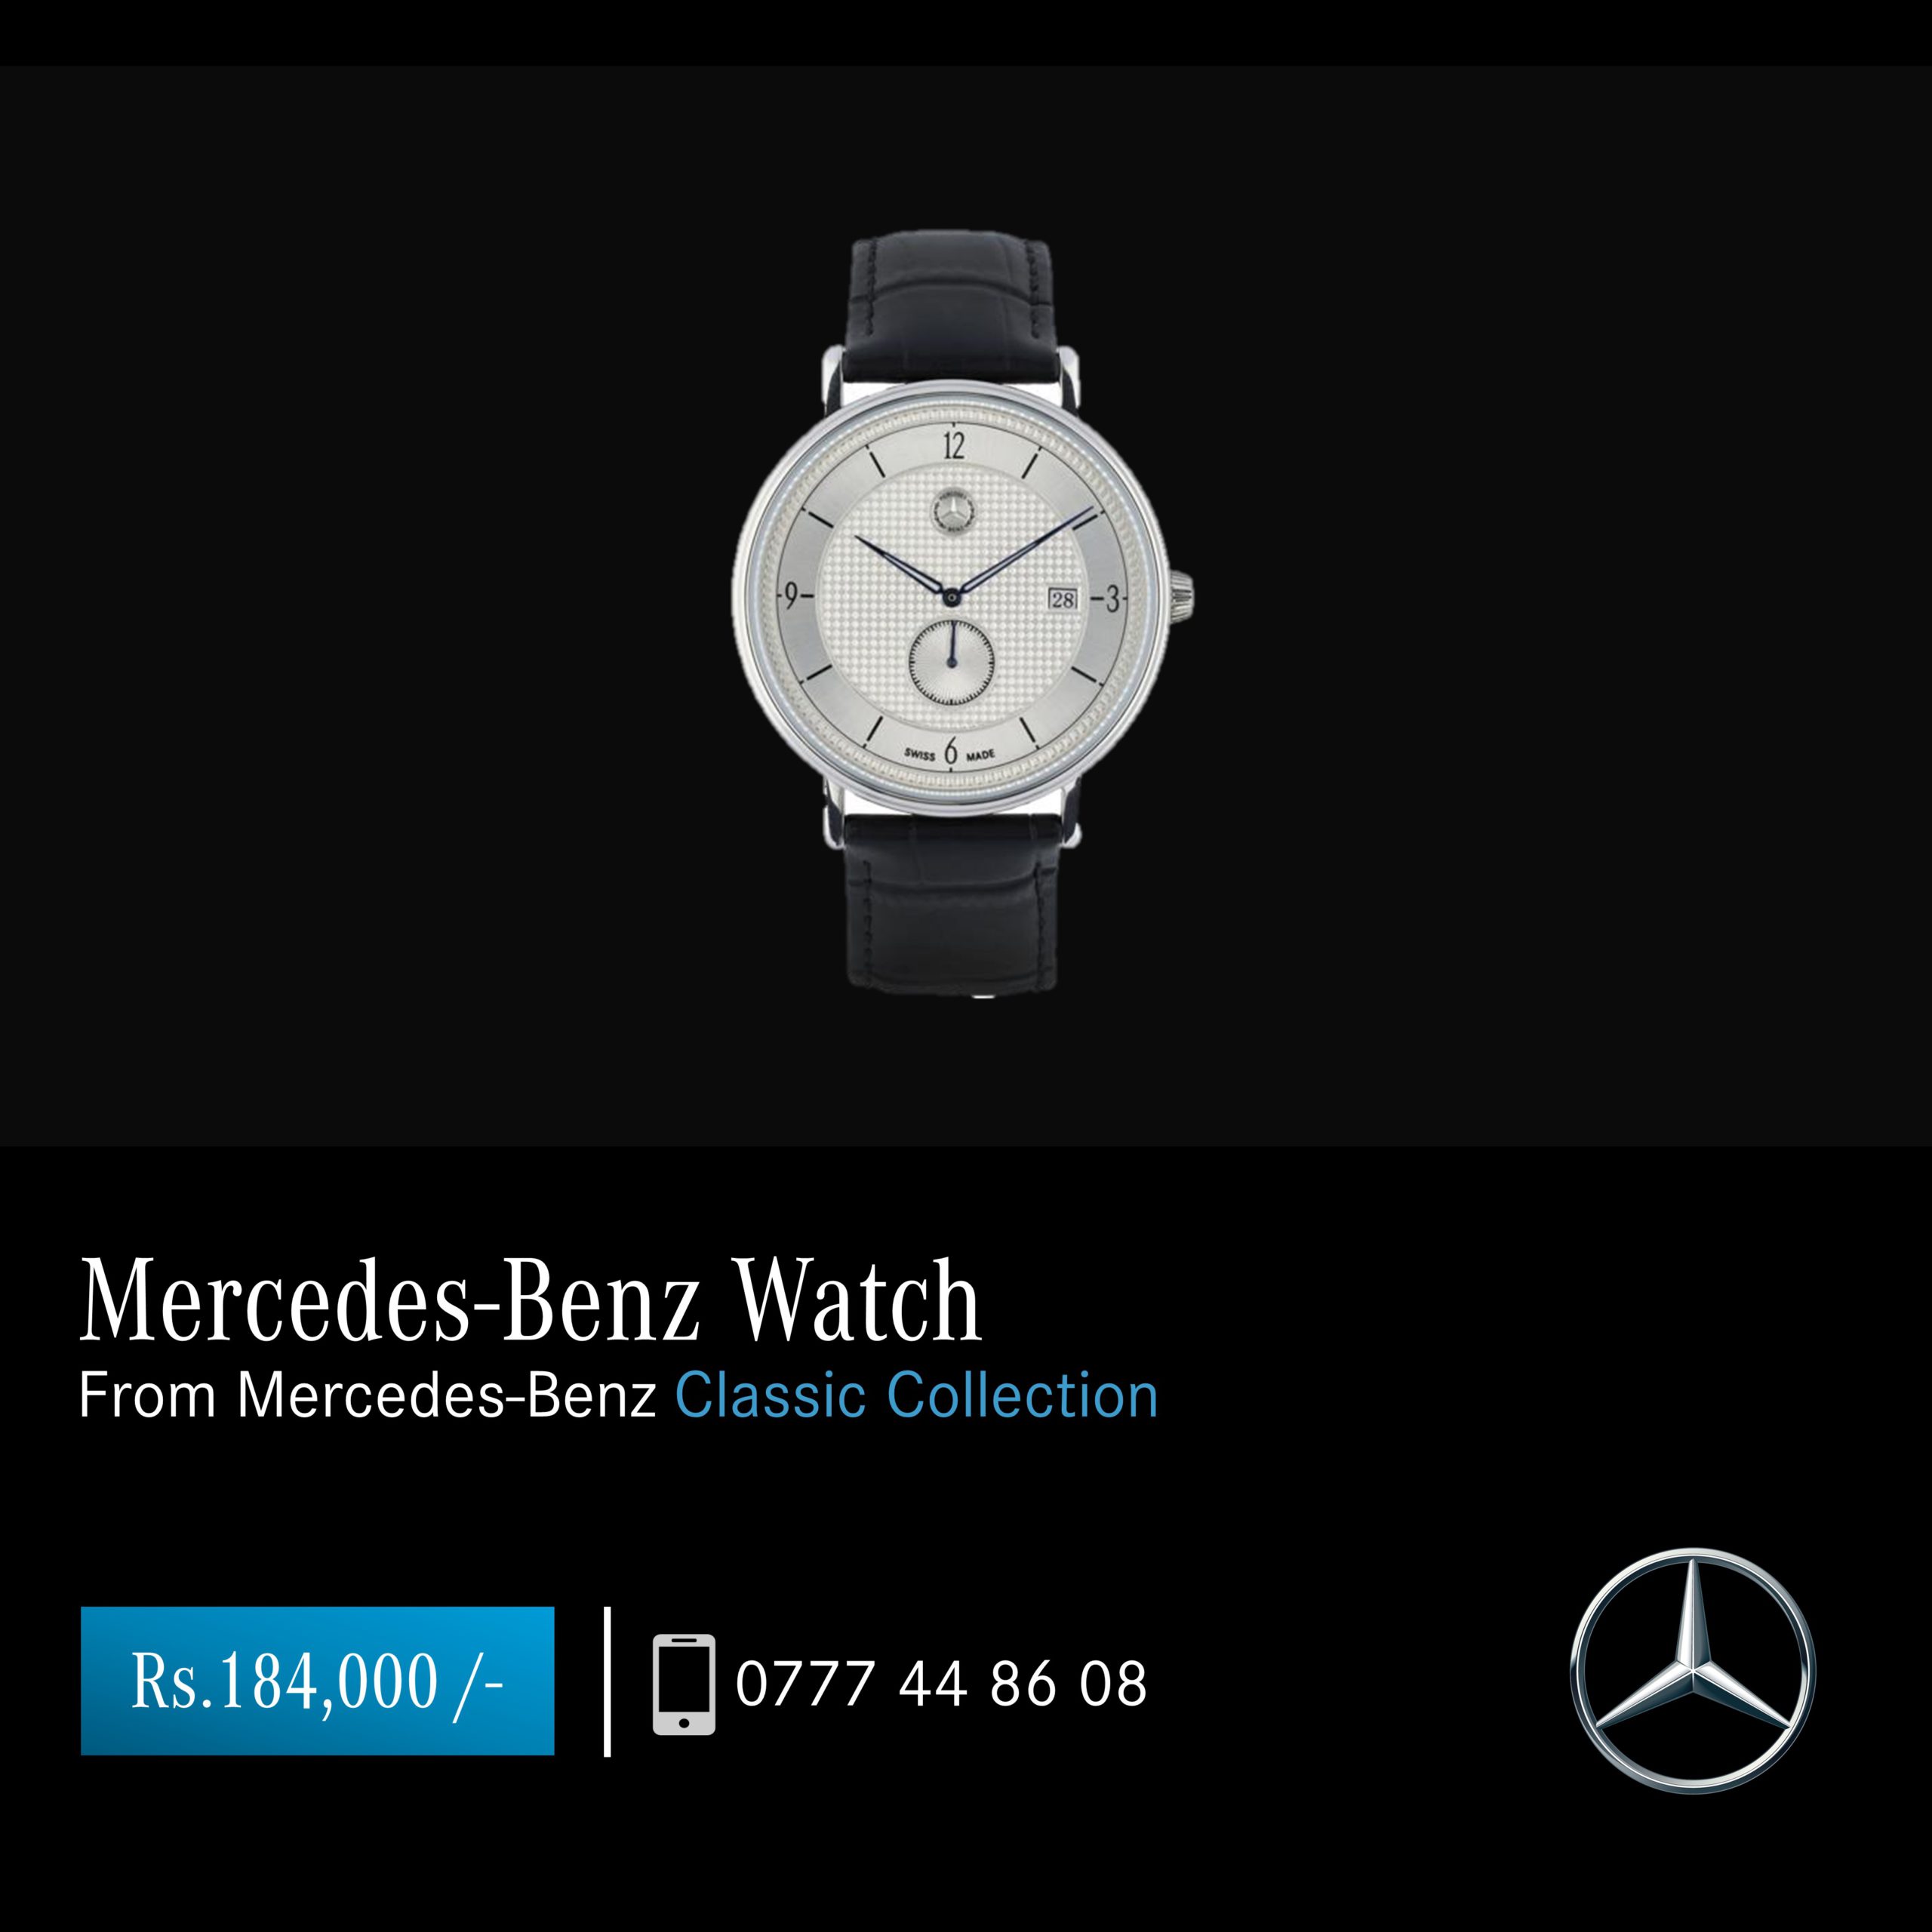 MP3 watch from Mercedes Benz